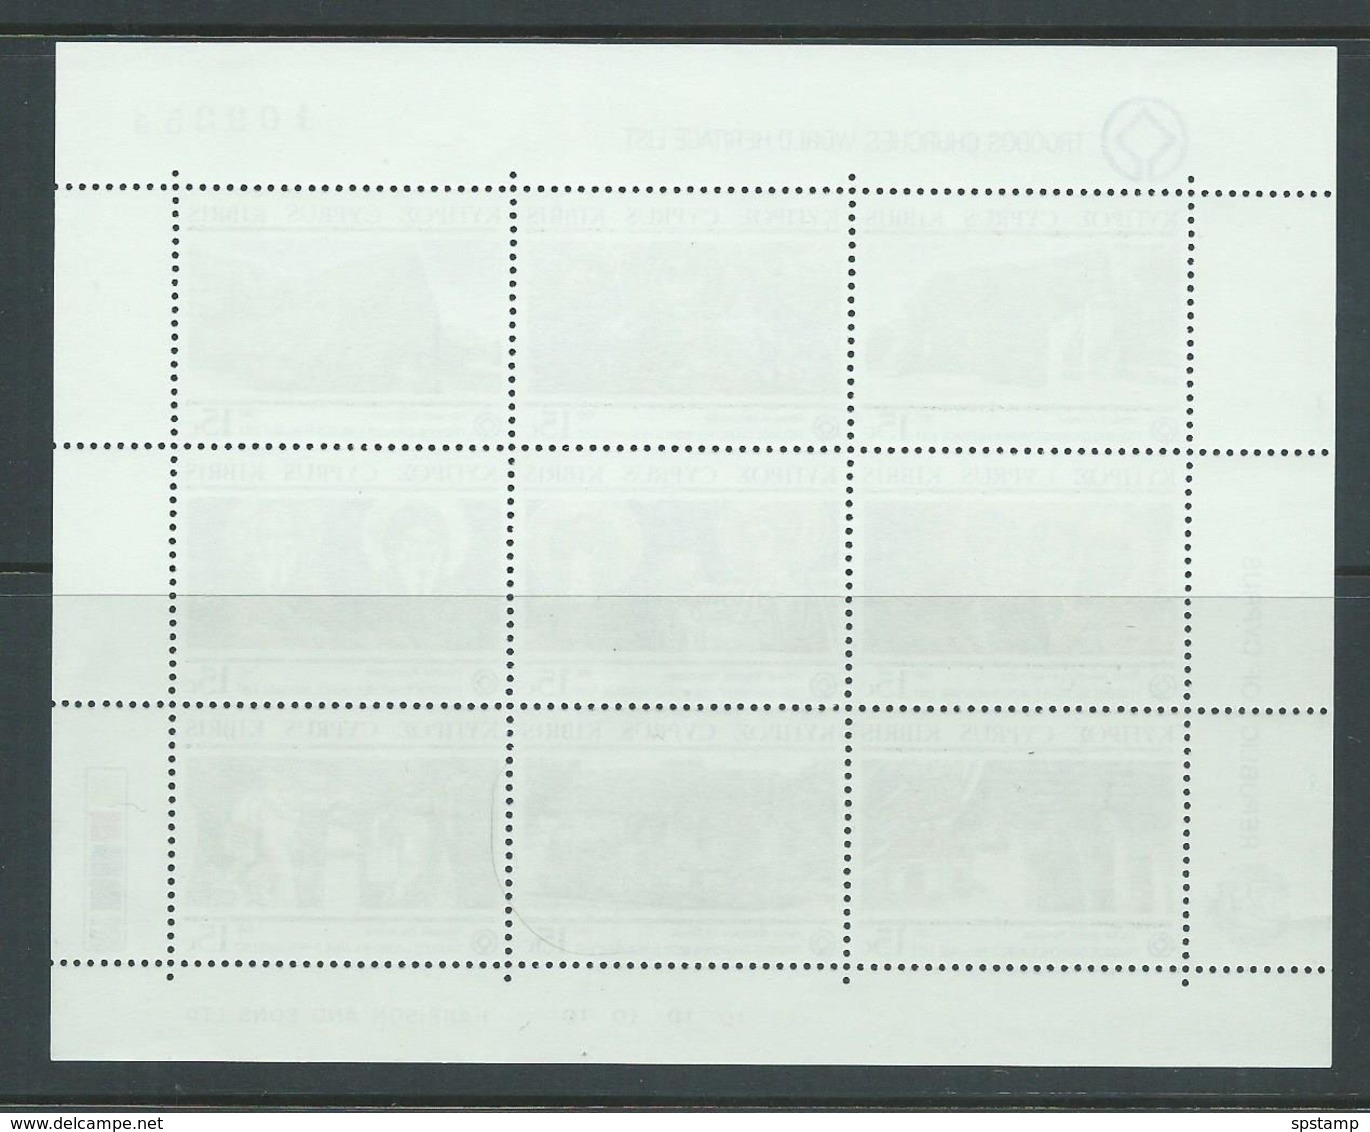 Cyprus 1987 Troodos Heritage Churches Sheet Of 9 MNH , 1 Stamp With Gum Flaw - Unused Stamps